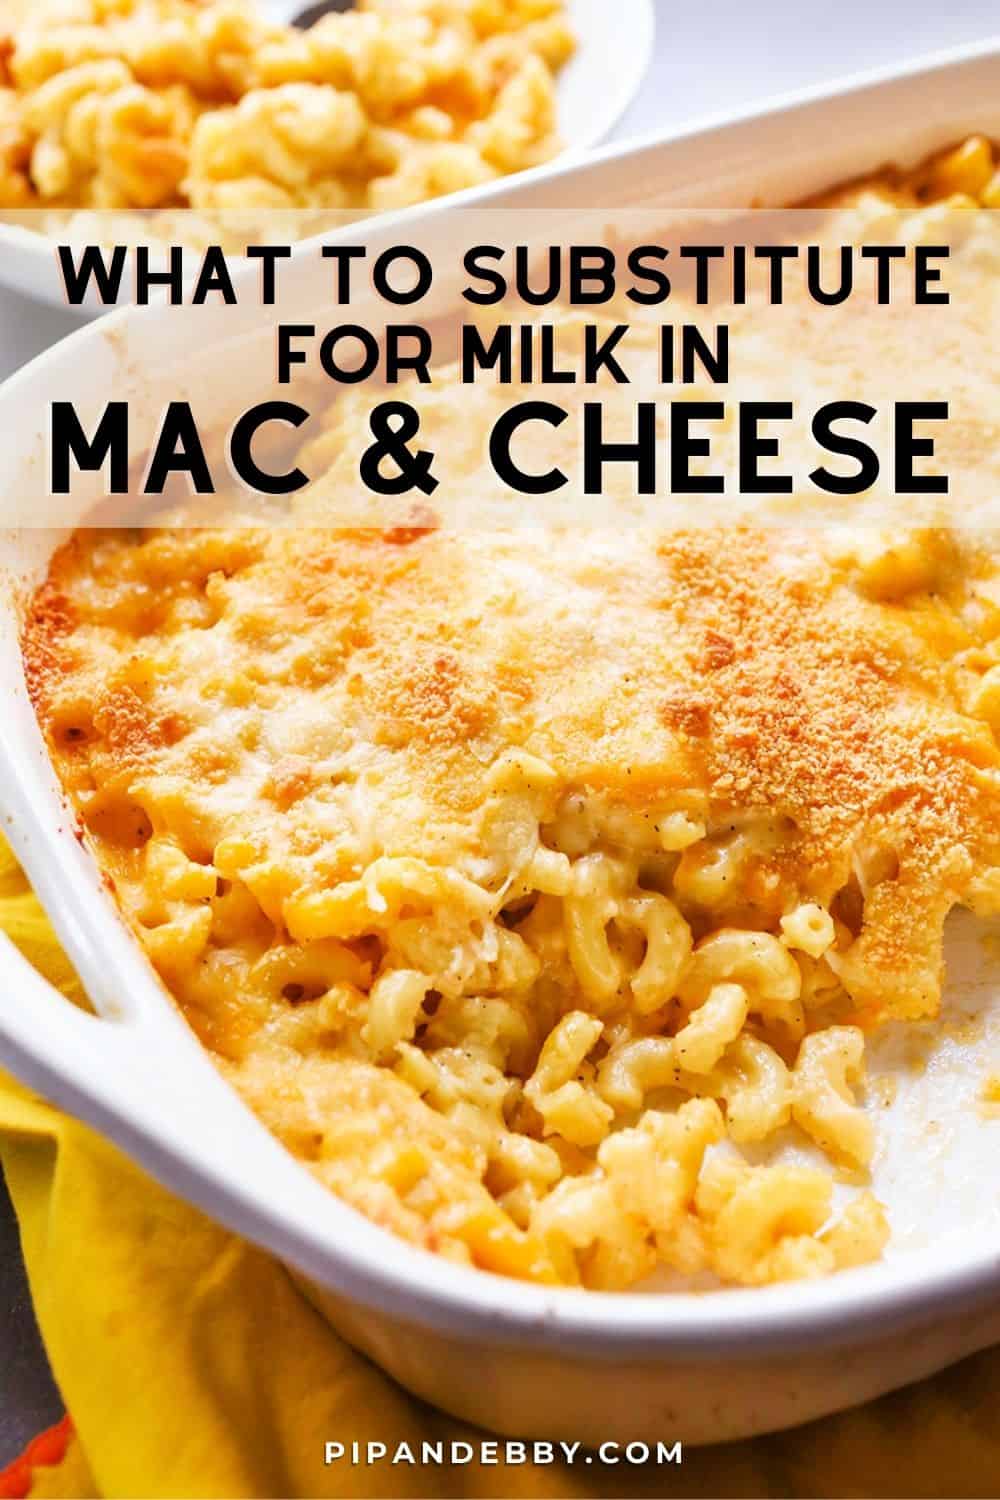 Pan of mac and cheese with text overlay reading, "What to substitute for milk in mac & cheese."